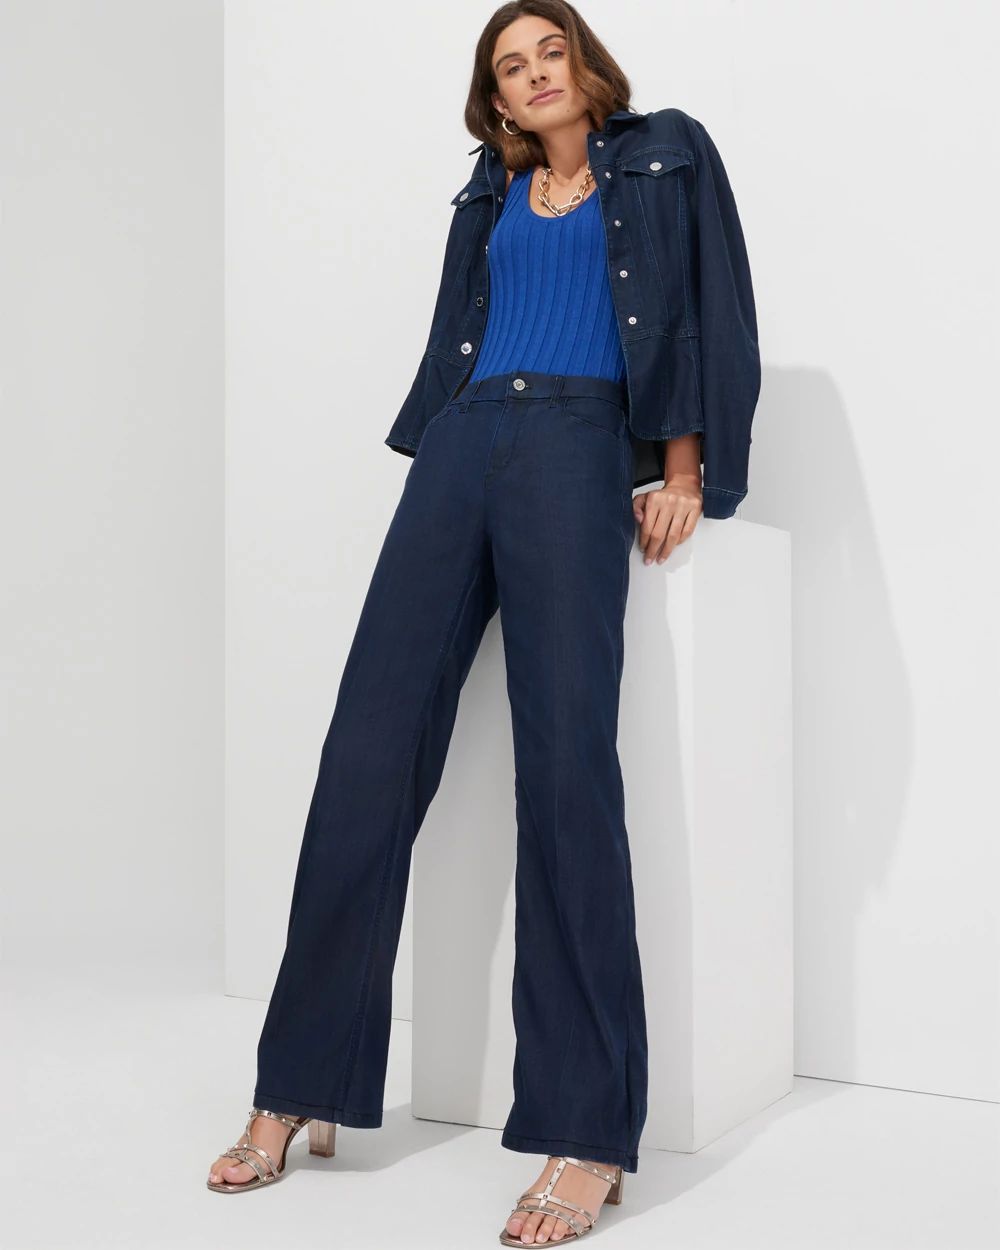 Outlet WHBM High-Rise Wide-Leg Jeans click to view larger image.